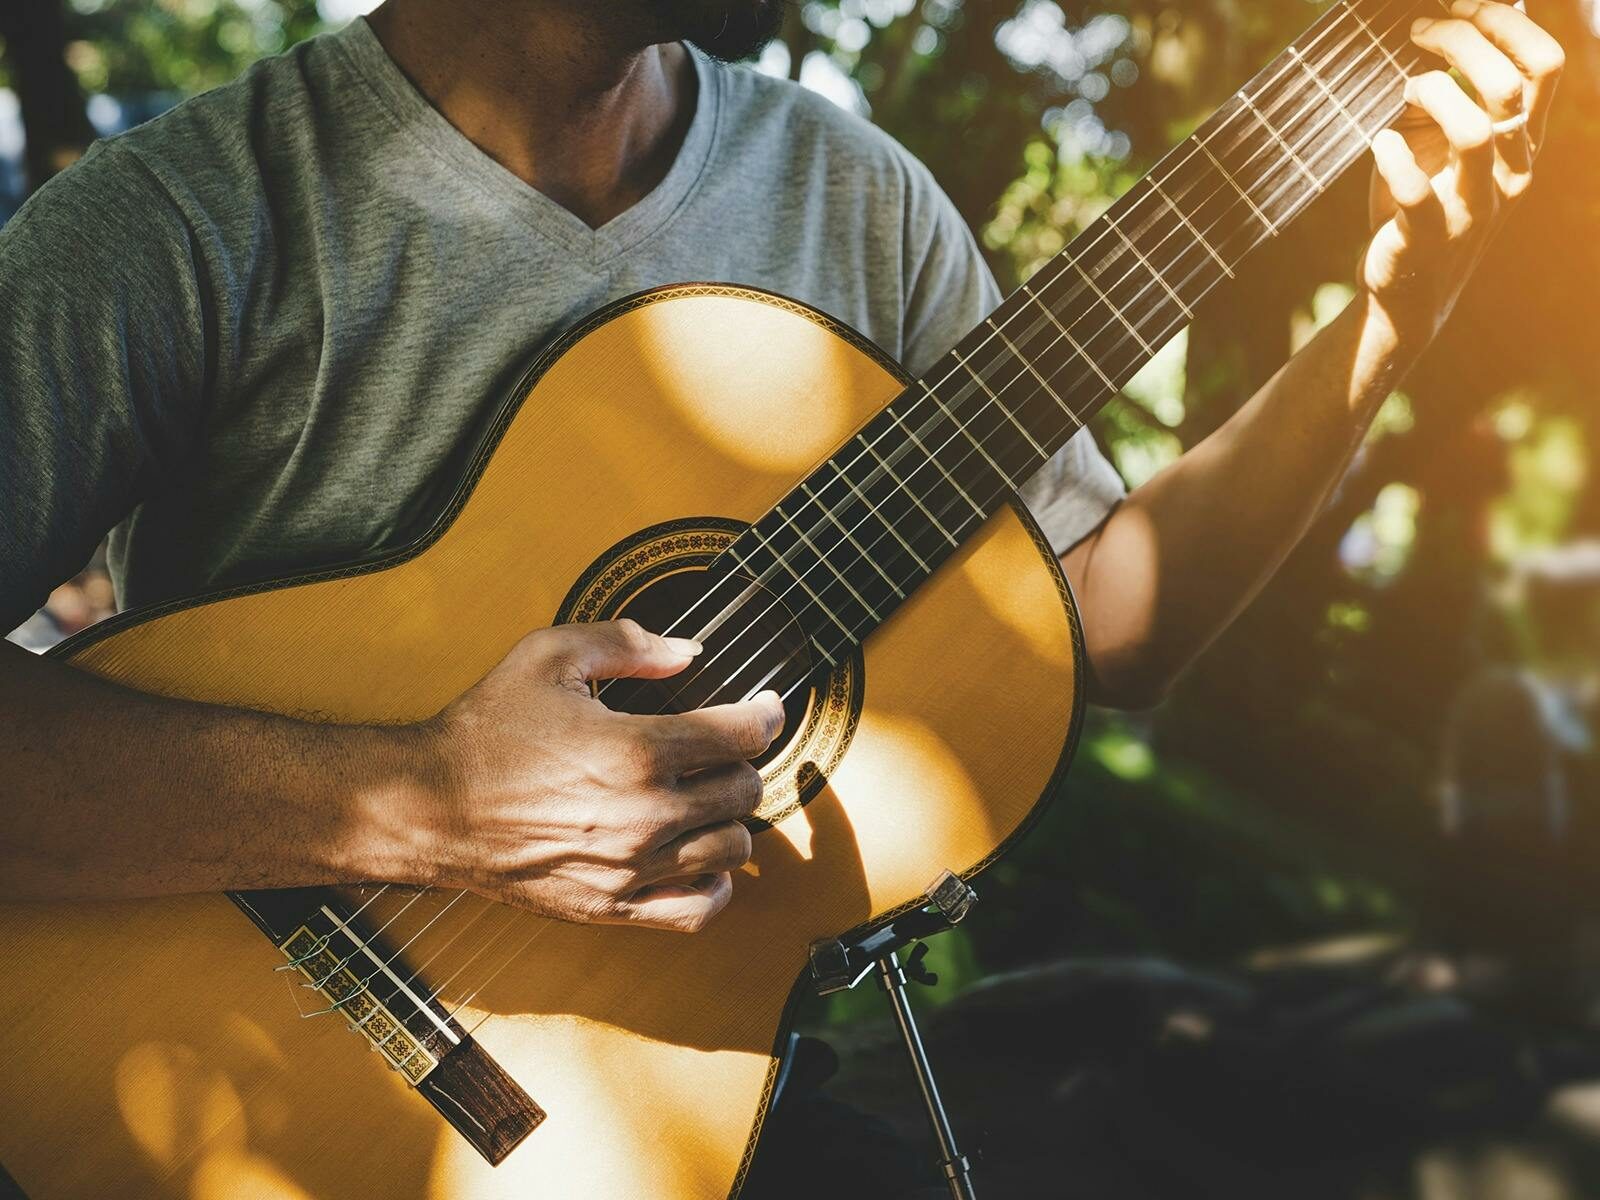 Photograph of someone holding a guitar